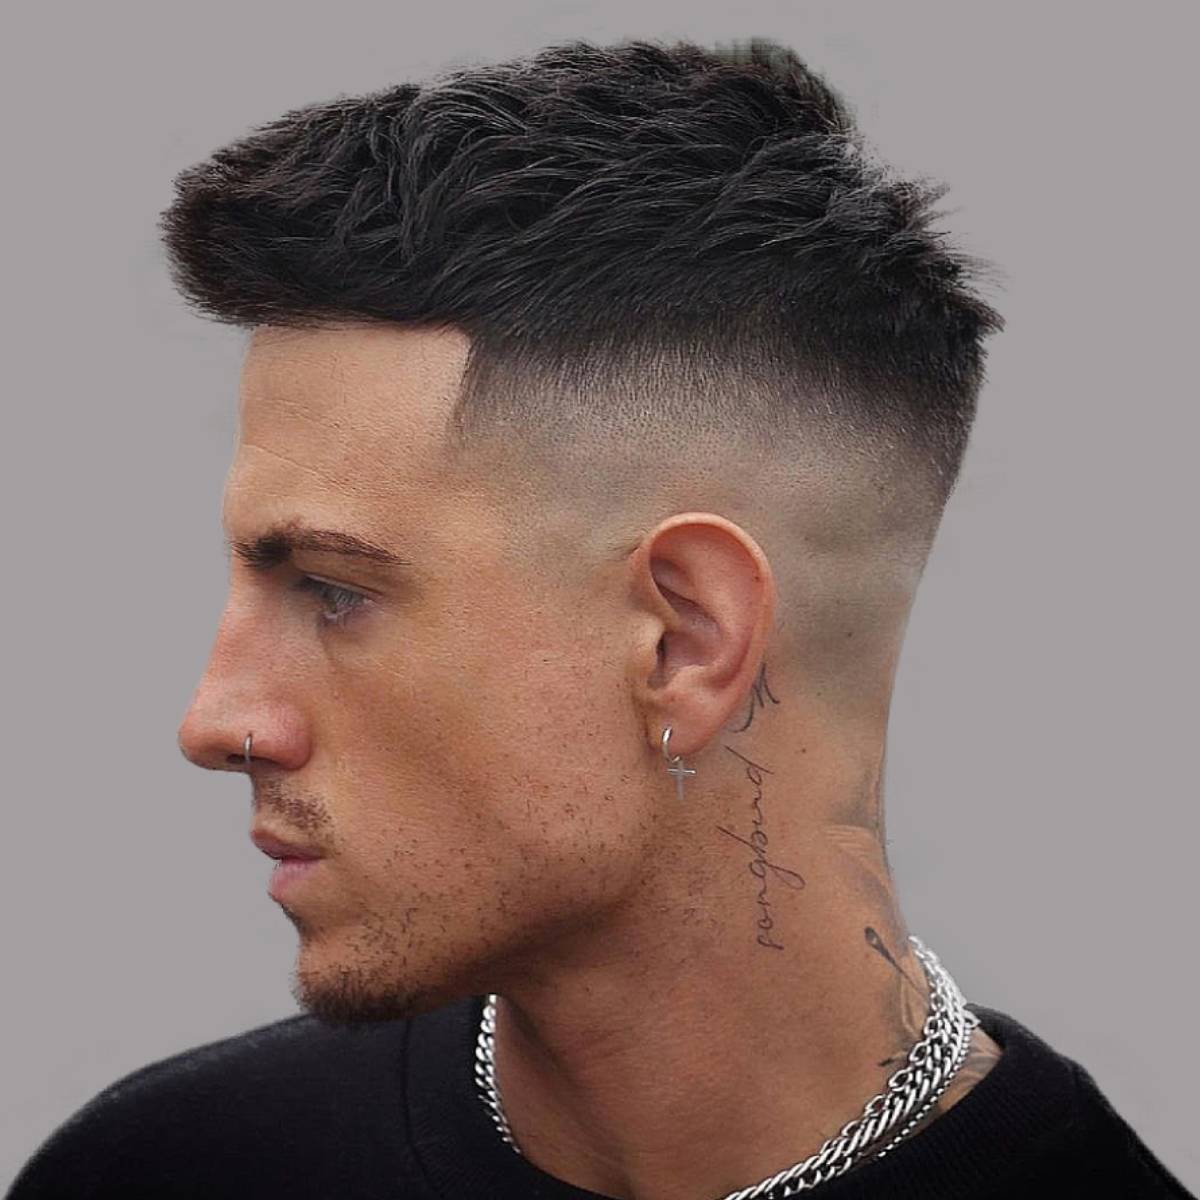 Men's haircuts 2022 – 2023: trends and photos